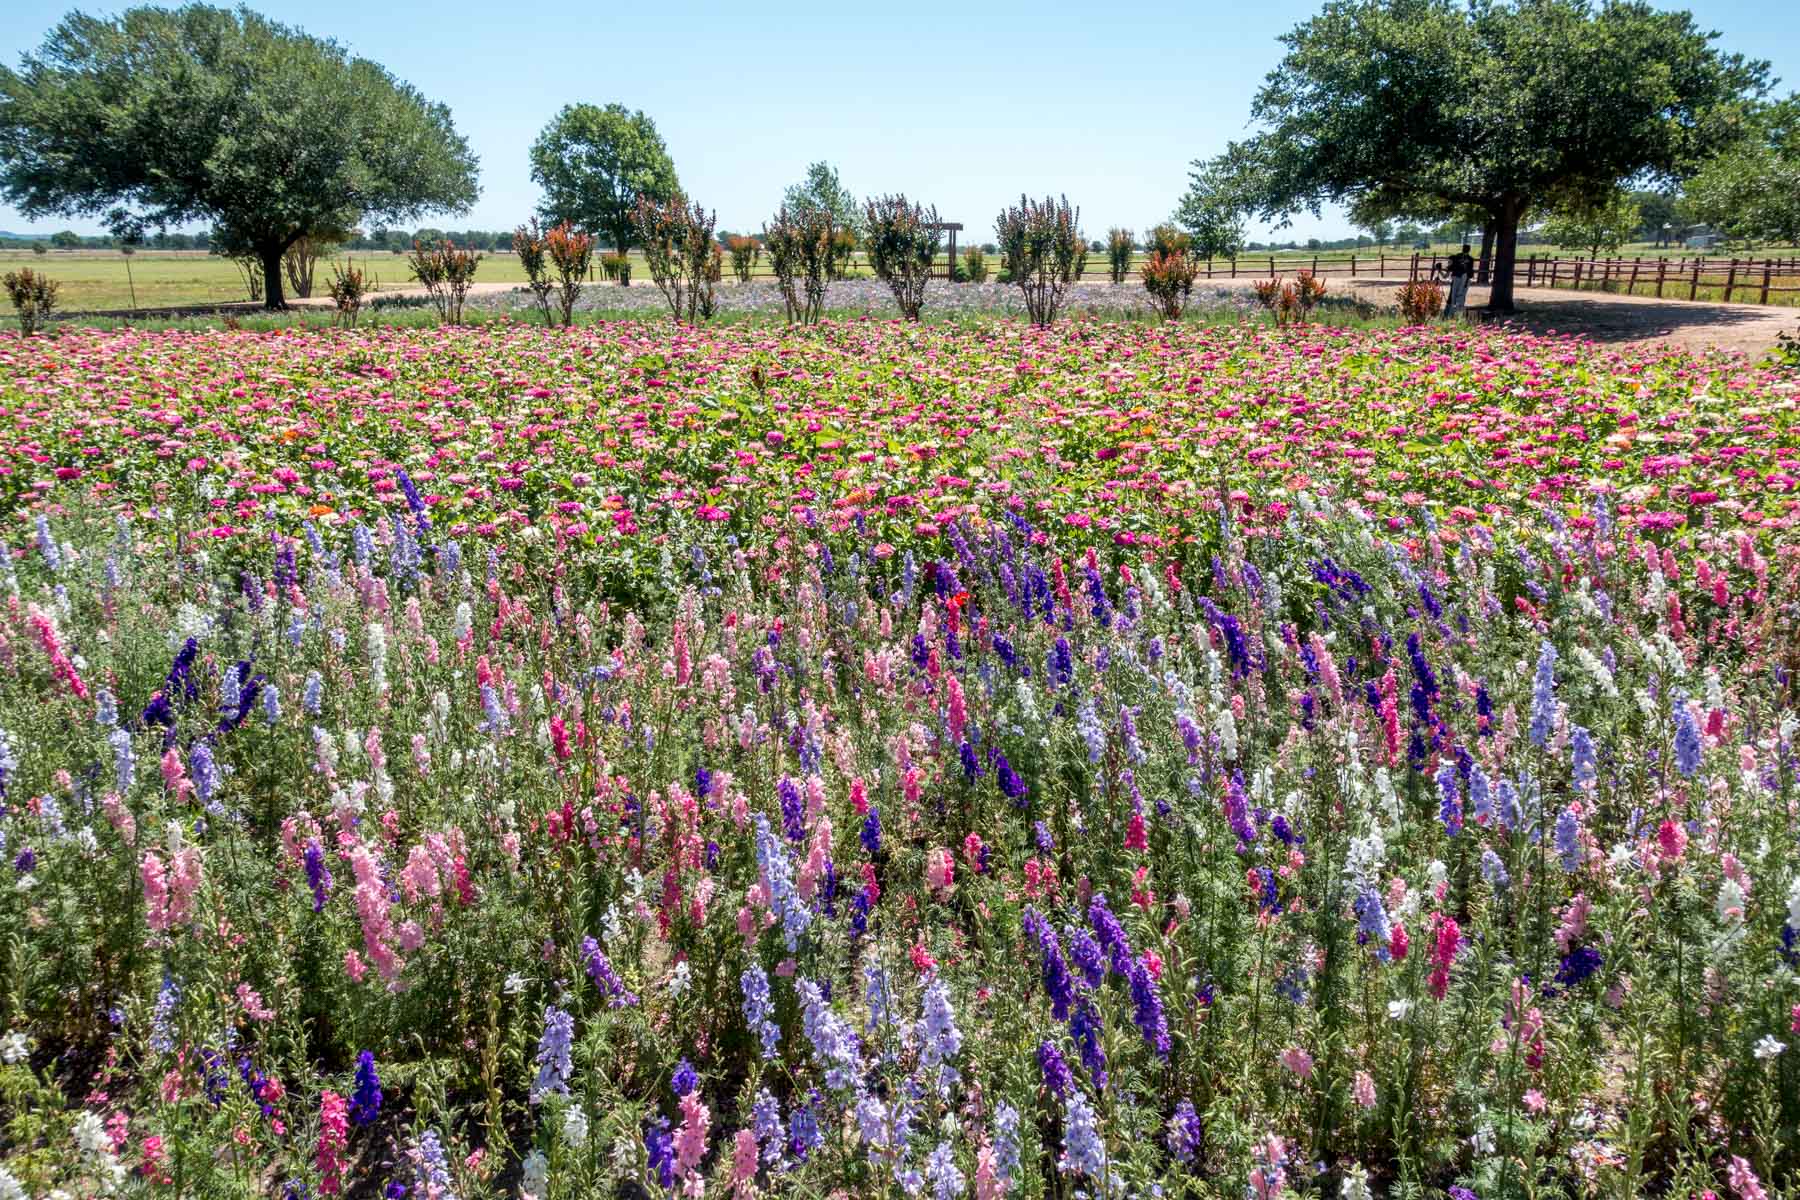 Field of purple, pink, and white wildflowers